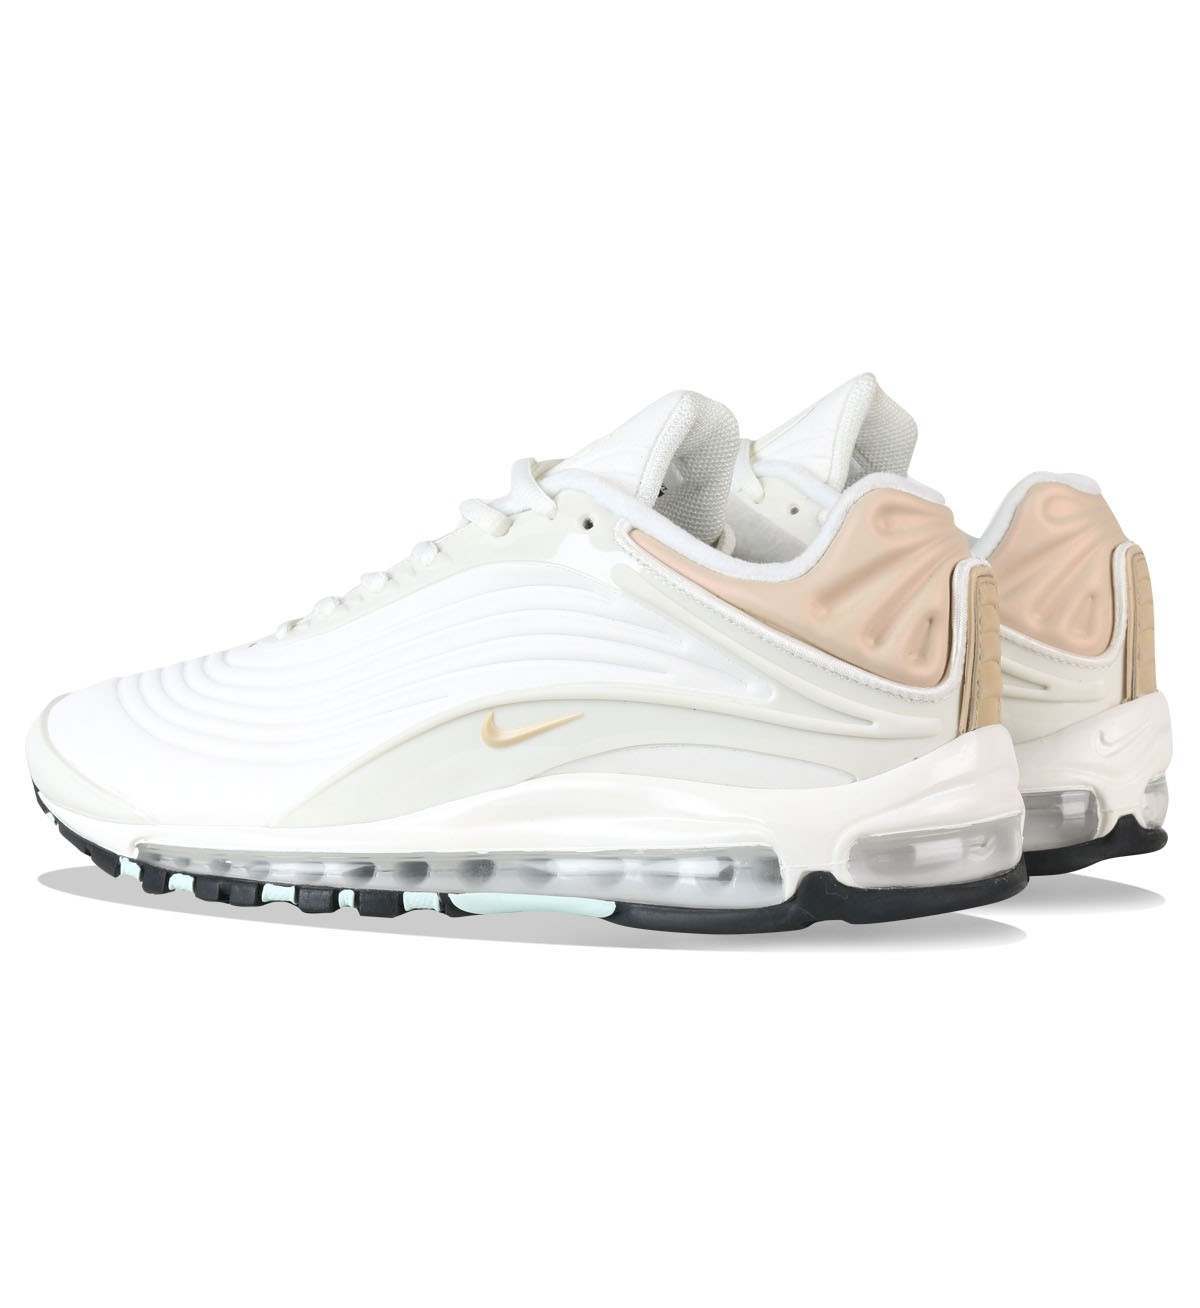 40% off Nike Air Max Deluxe SE ‘Sail’ | Buyandship Singapore